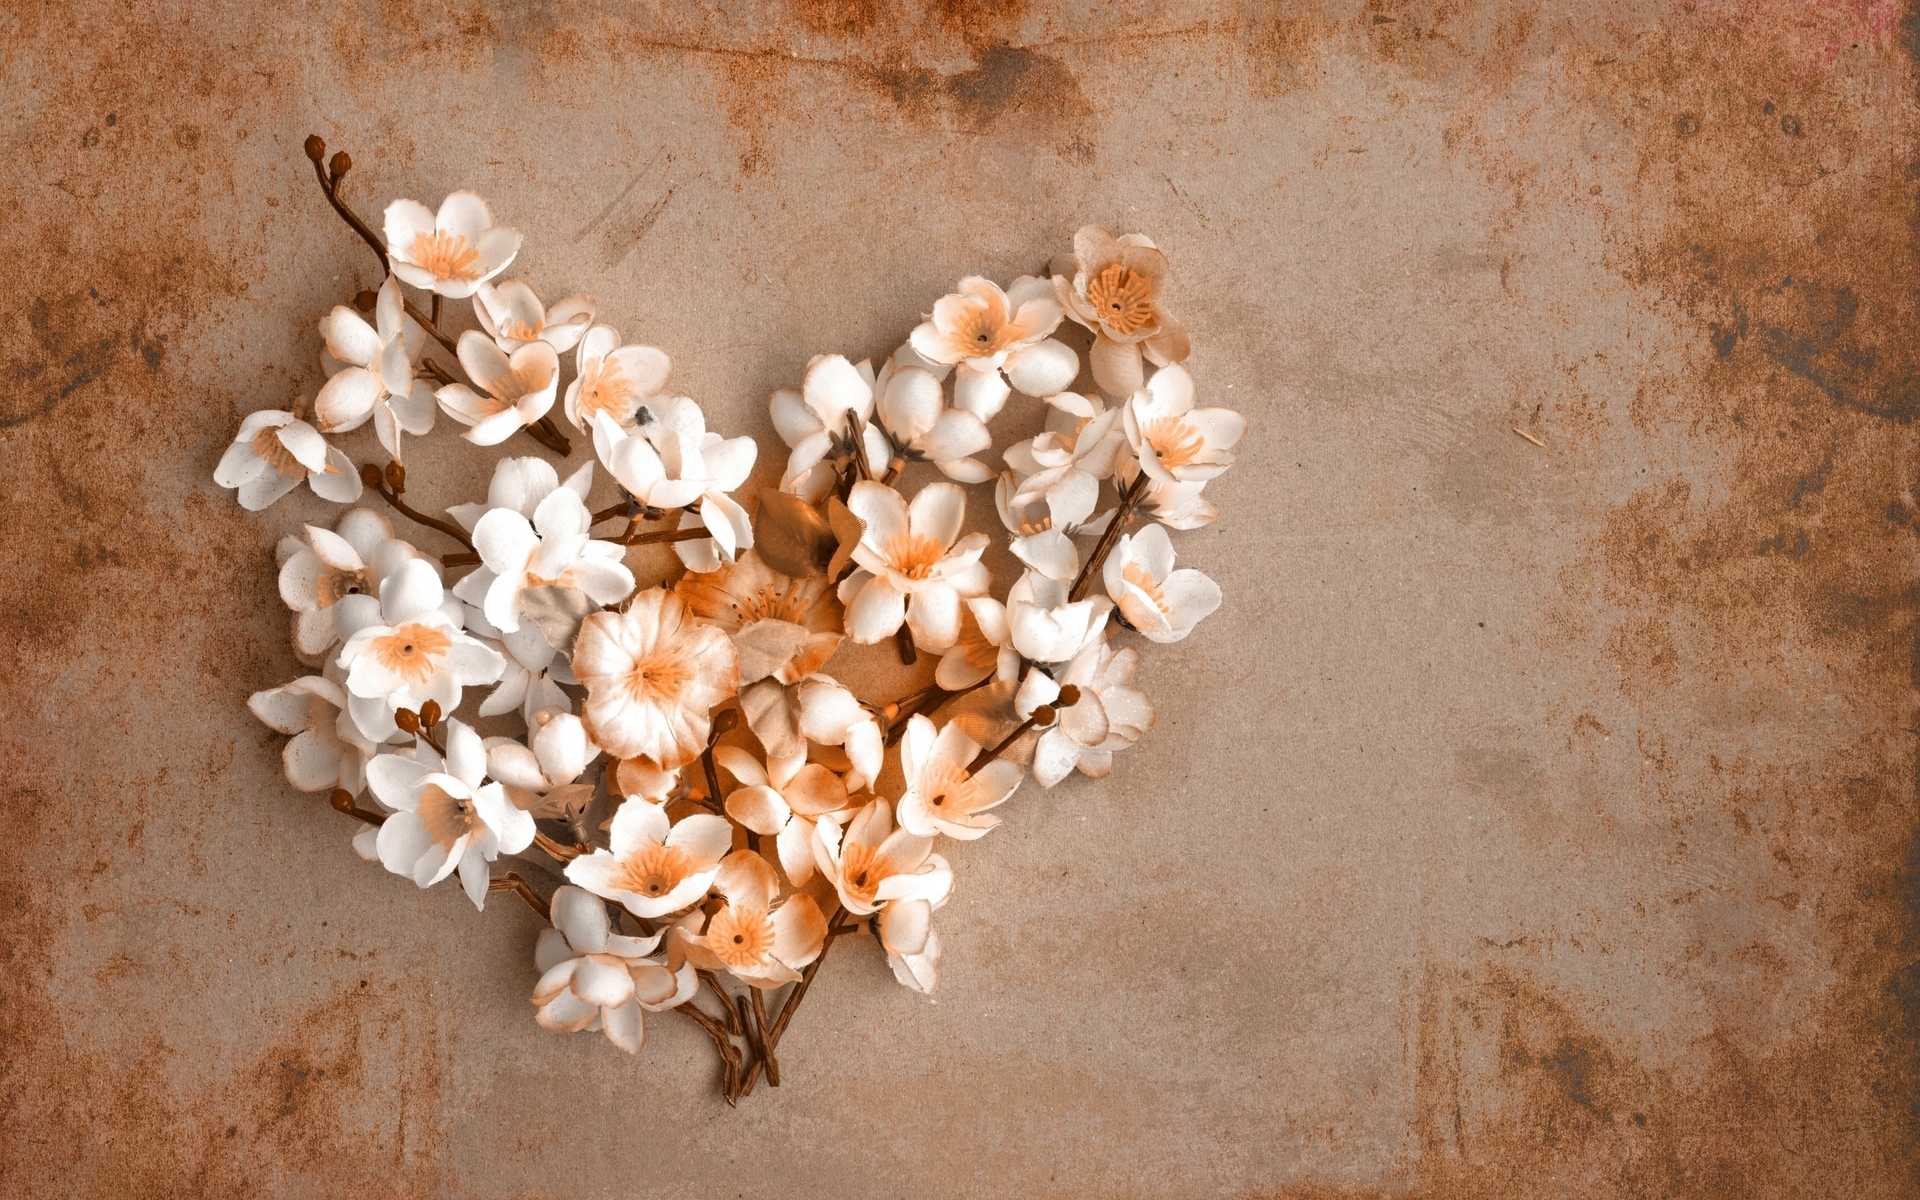 Image: Flowers, branches, heart, paper, vintage